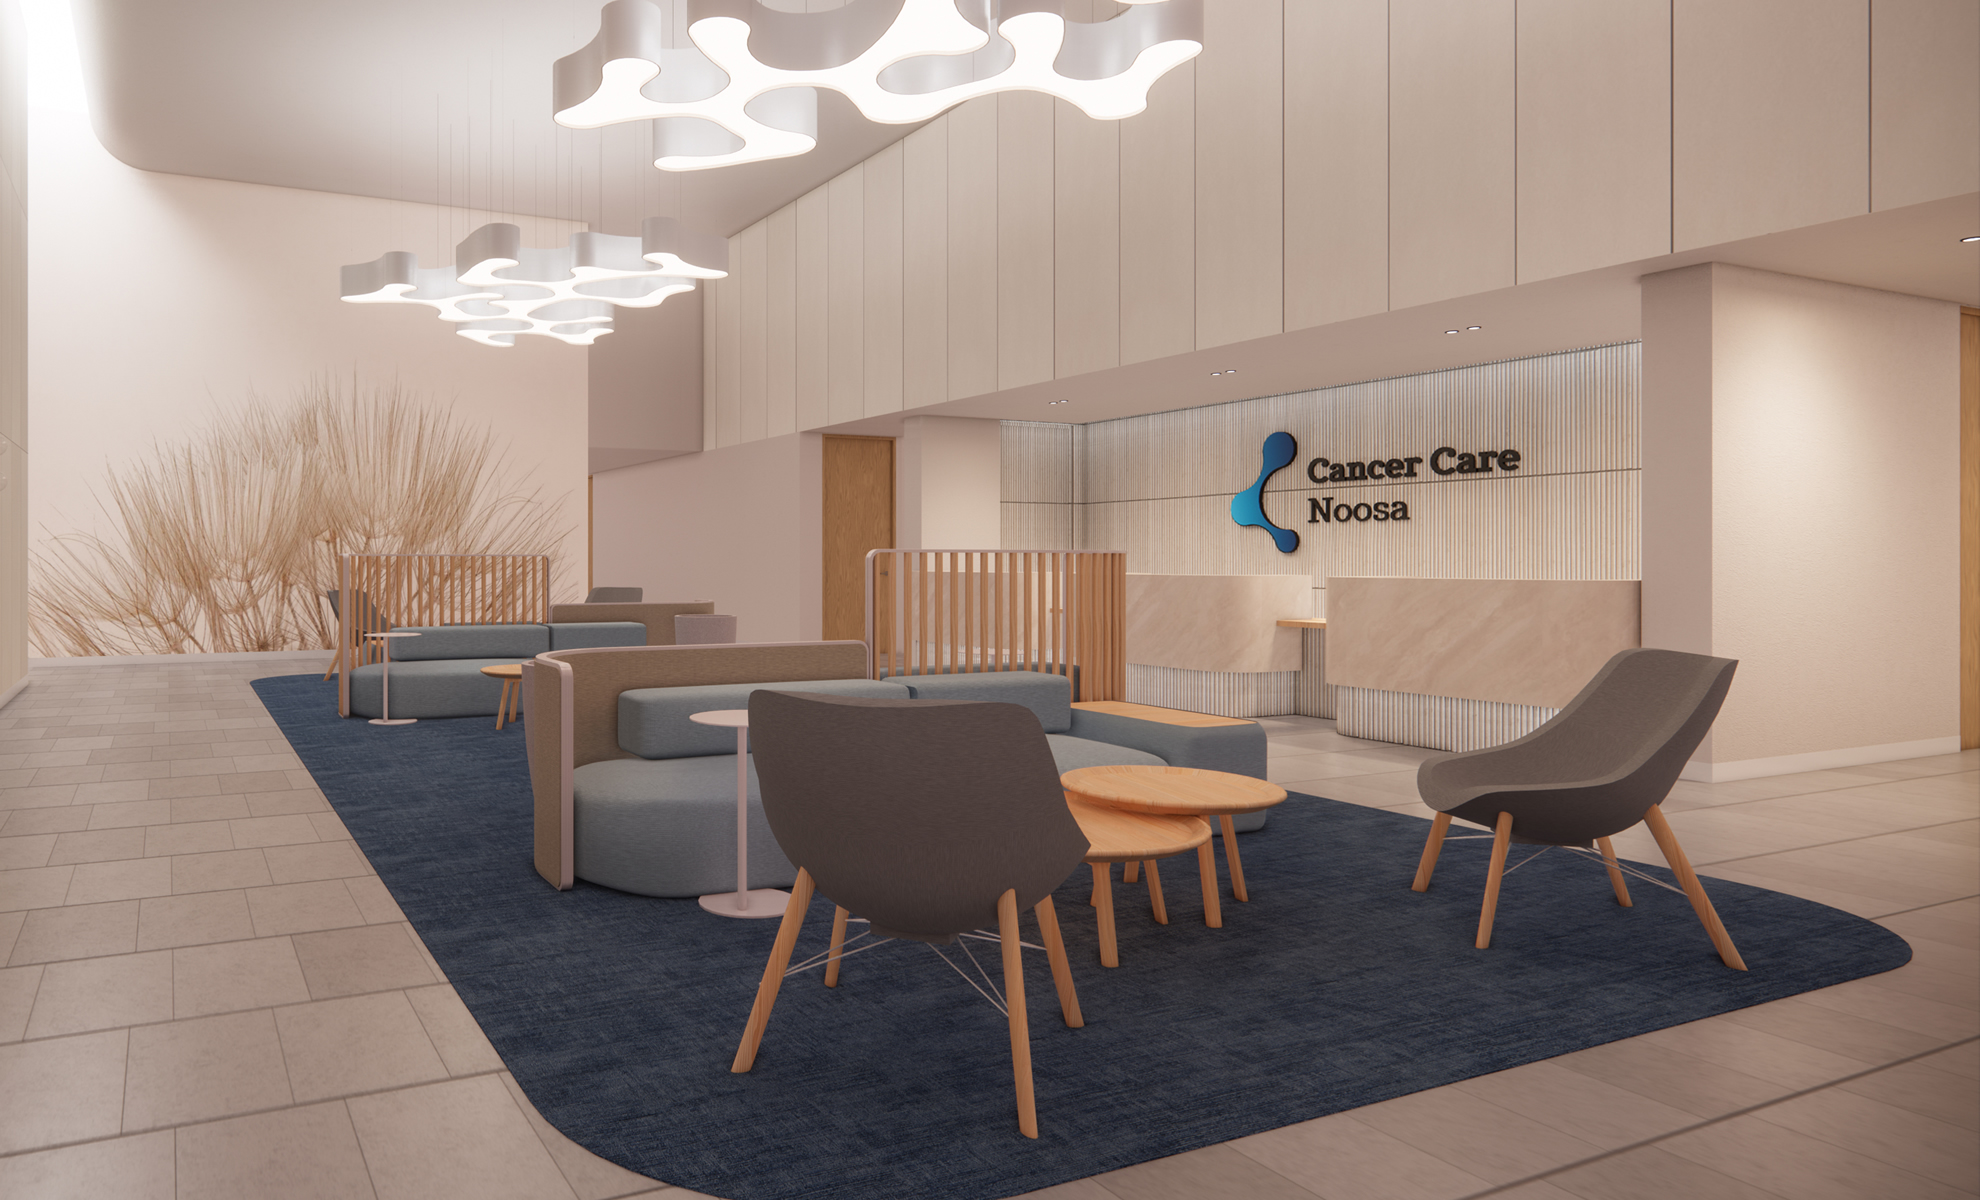 Cancer Care Associates | Cancer care facility in Noosaville Queensland